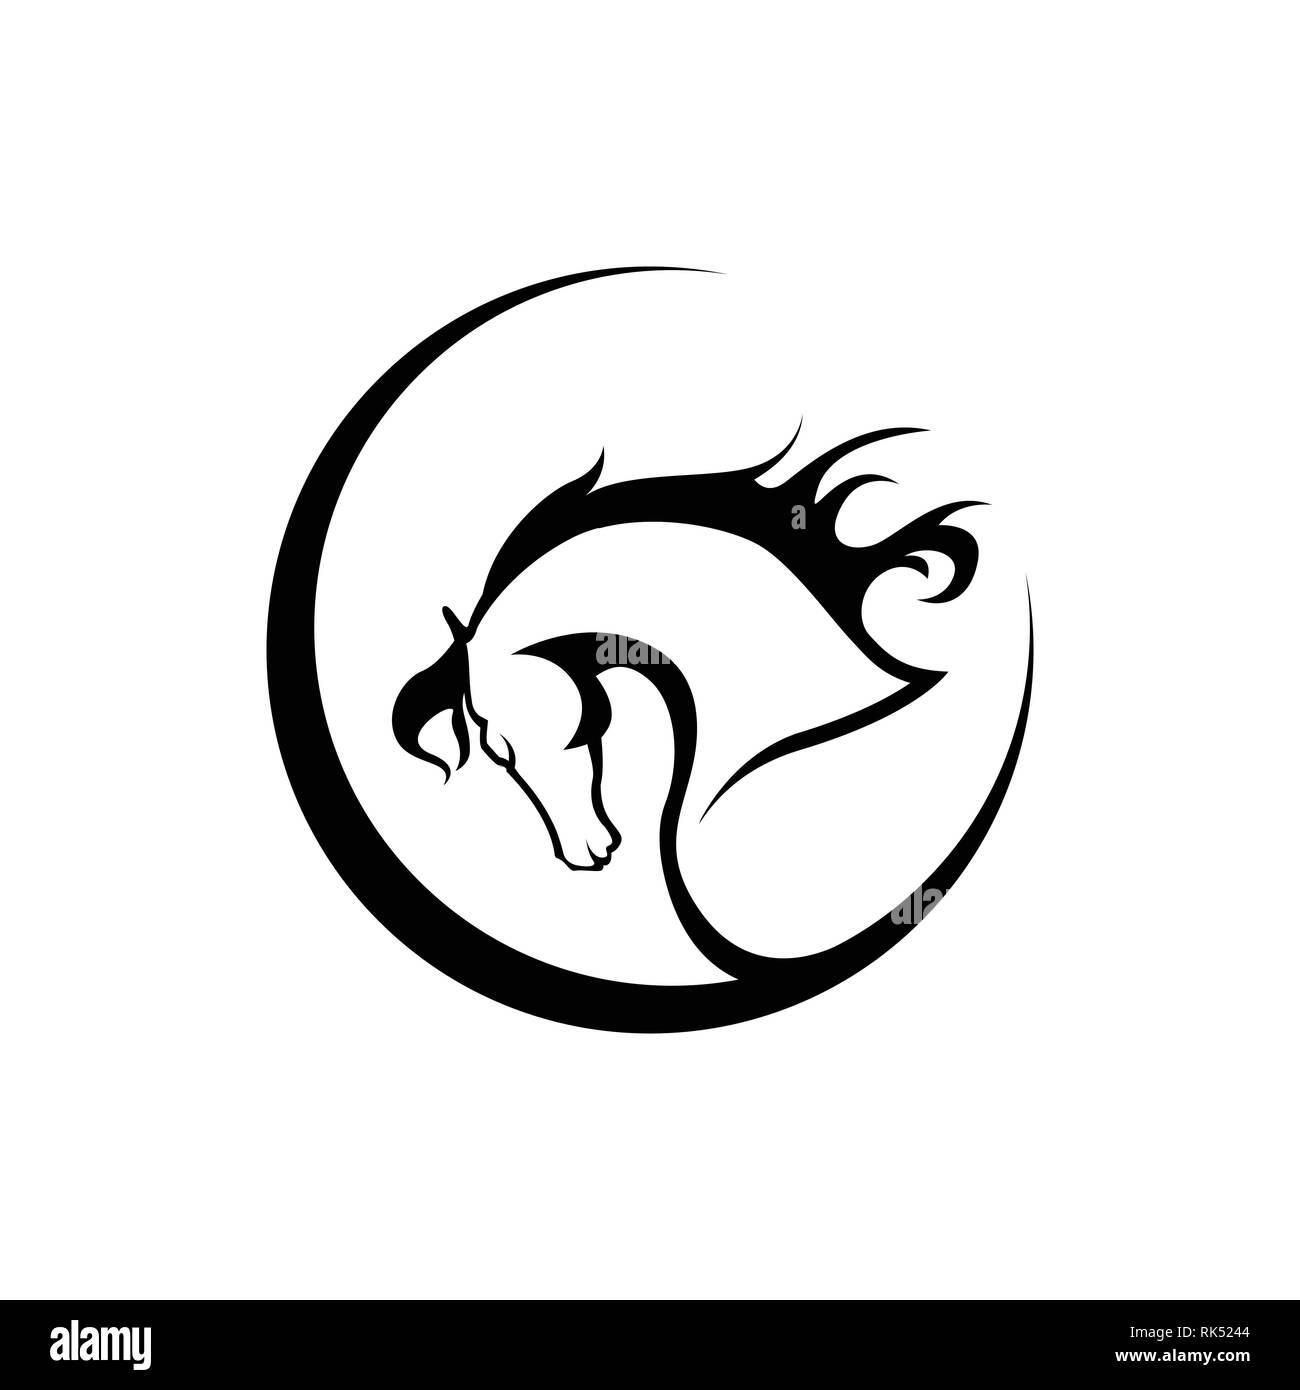 Circle shape with silhouette drawing of a horse head vector design Stock Vector